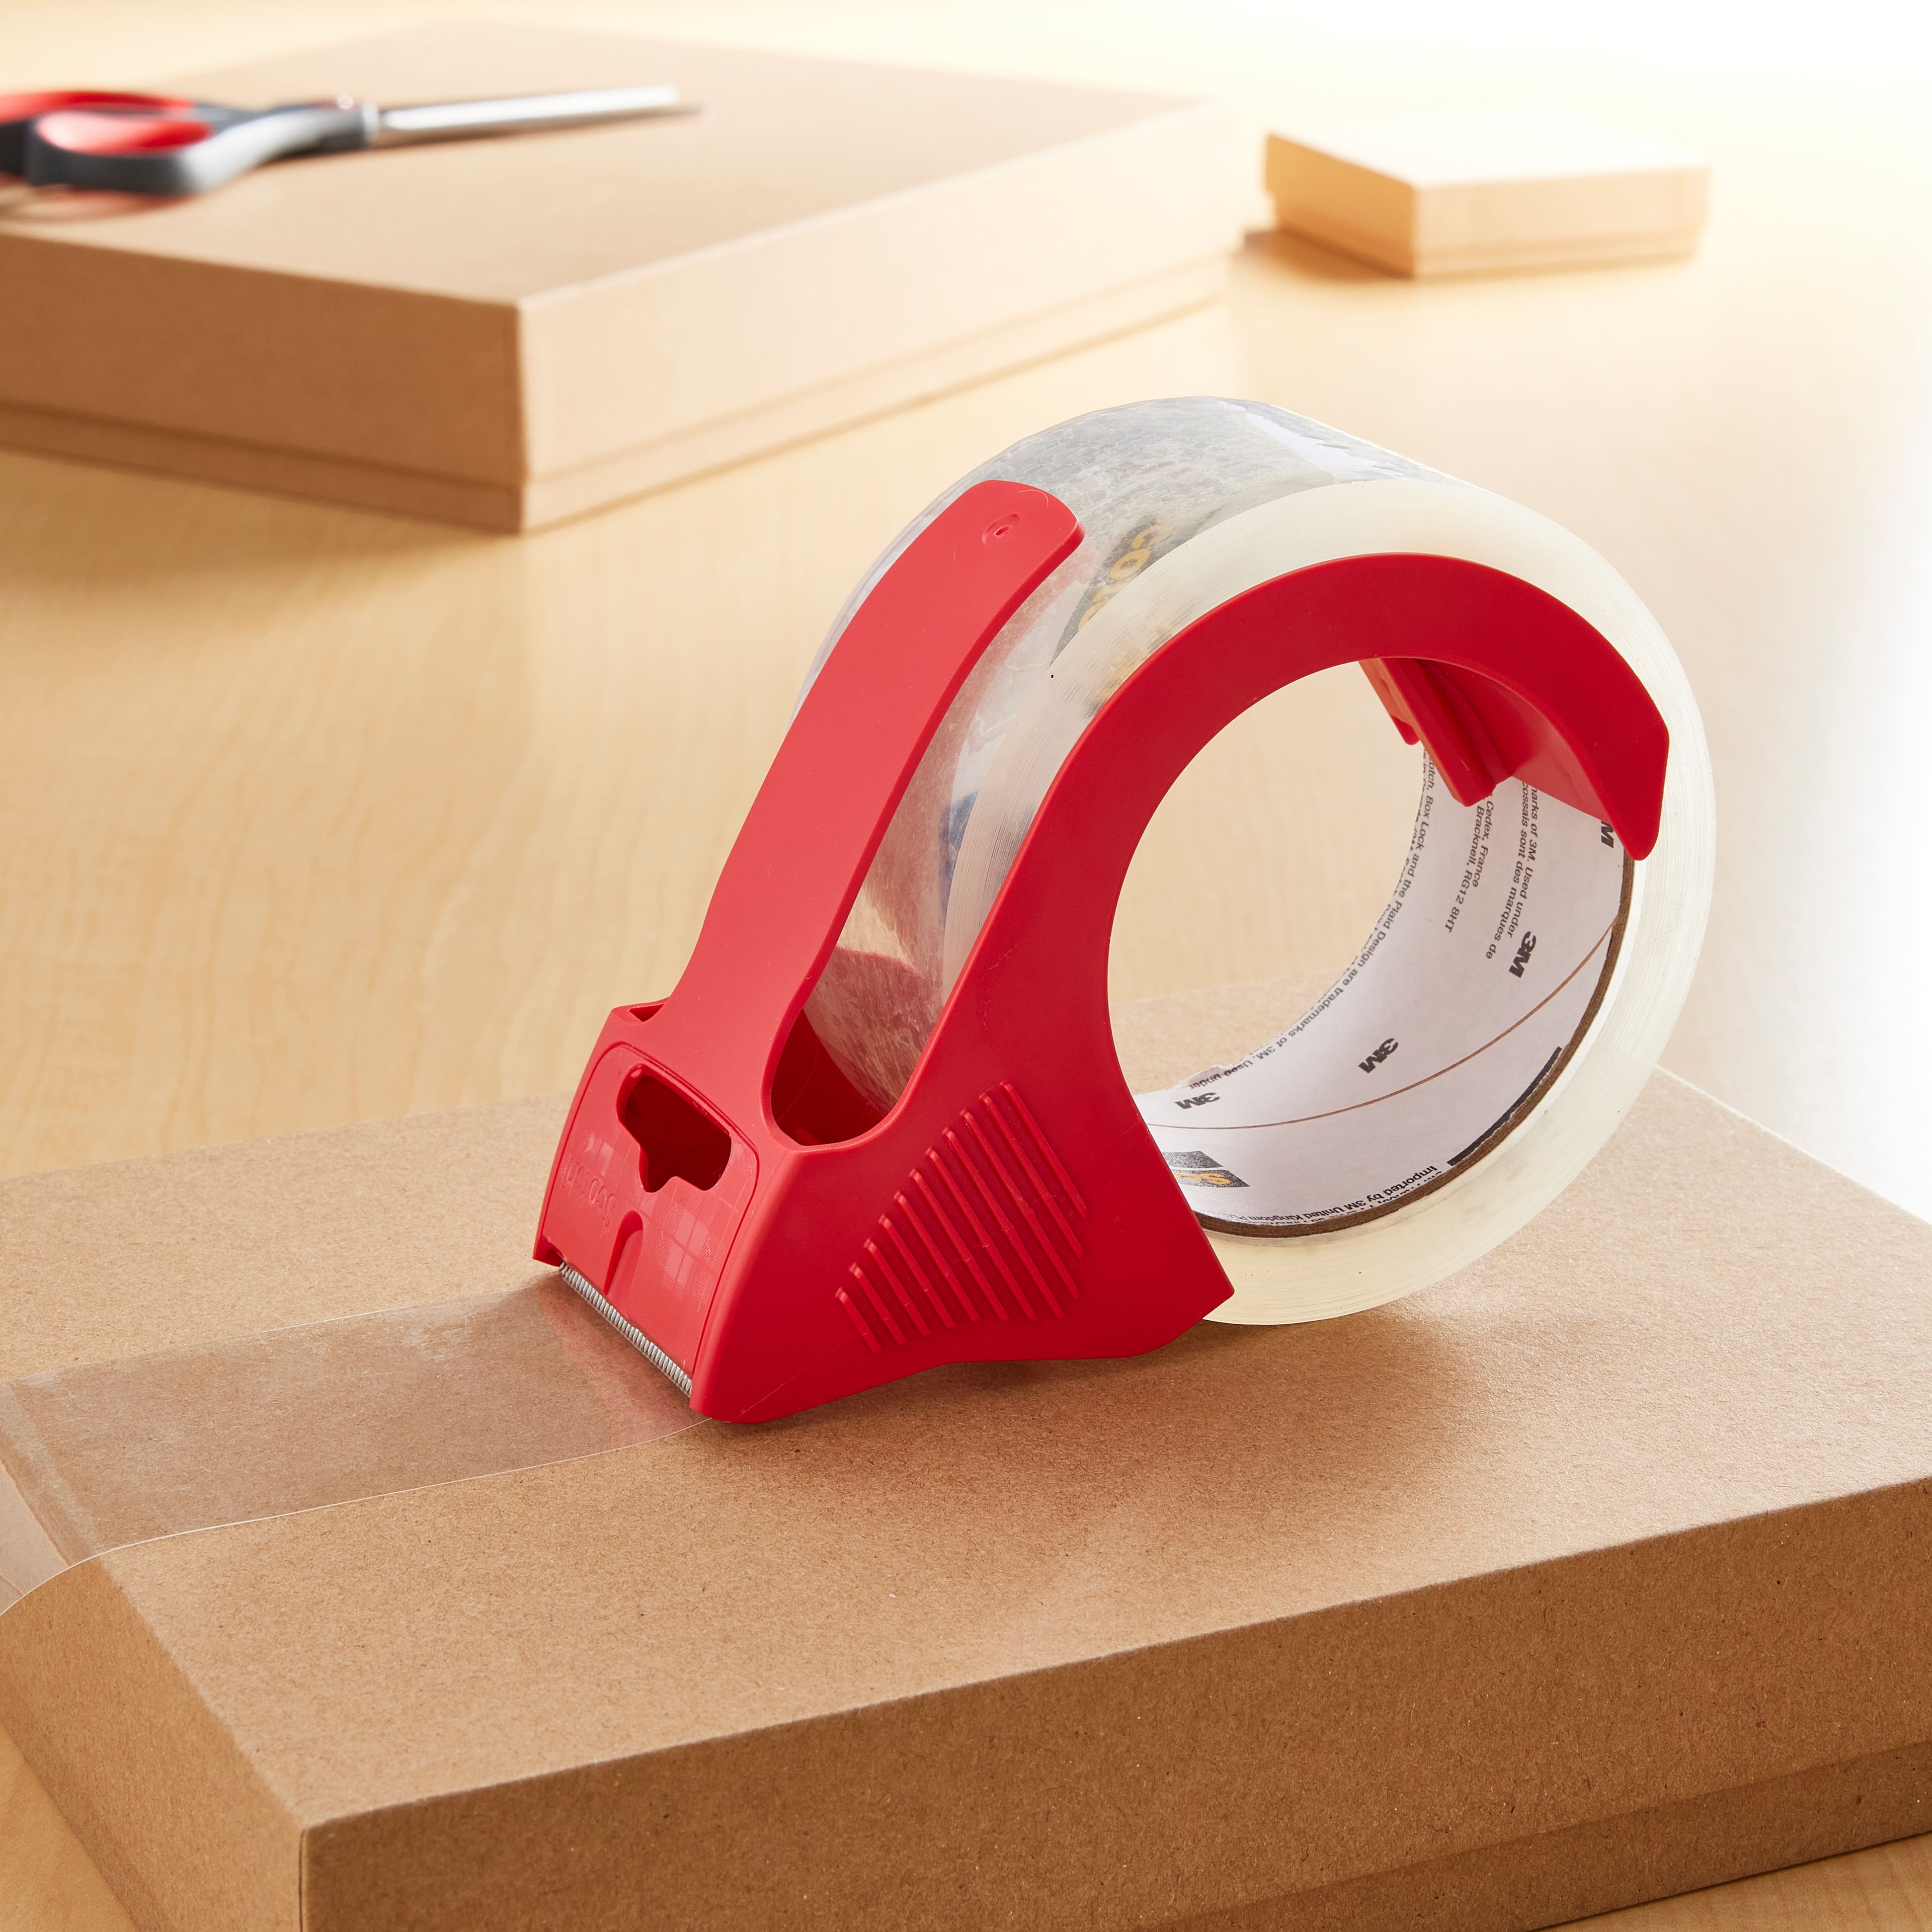 Scotch® Heavy Duty Shipping Packaging Tape with Dispenser